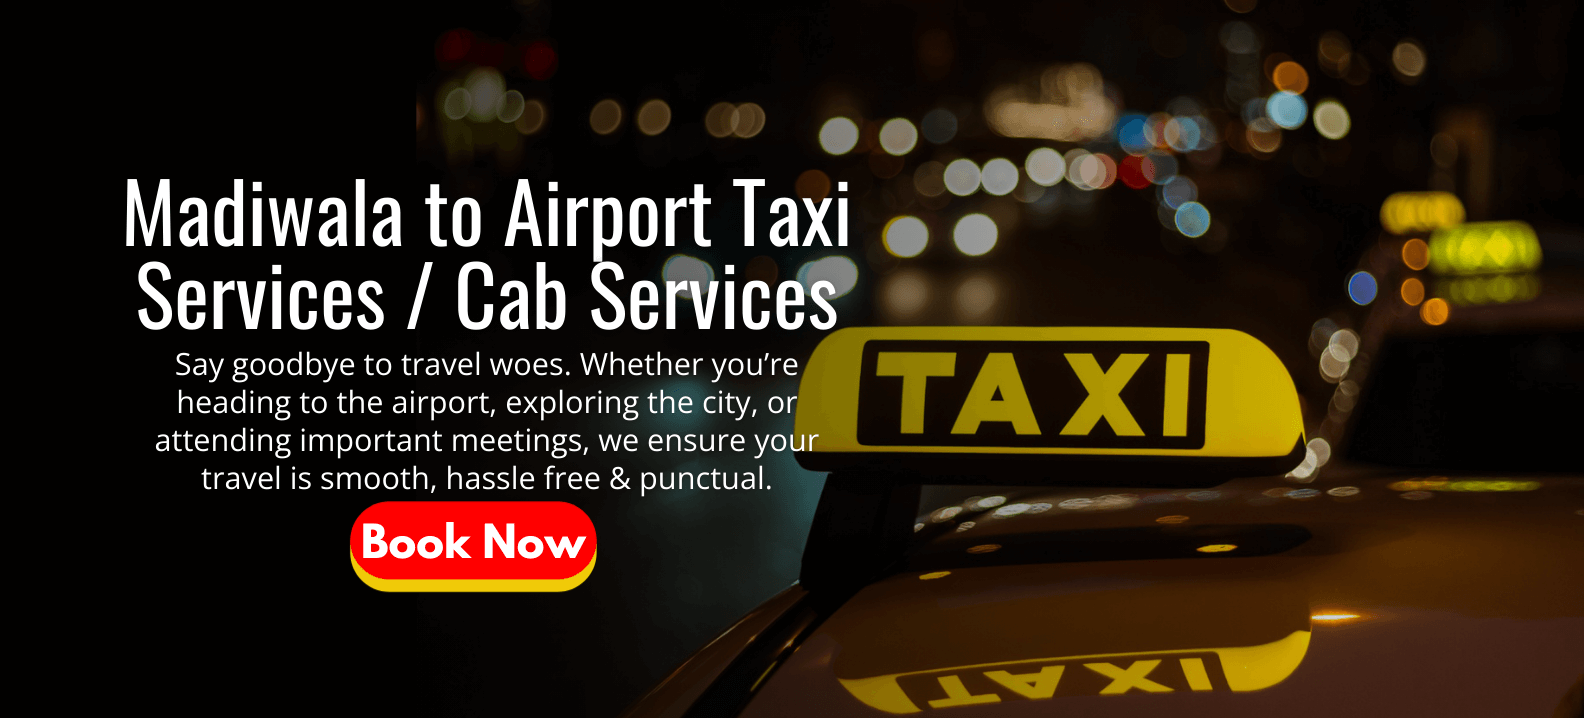 Madiwala to Airport Taxi Services Cab Services